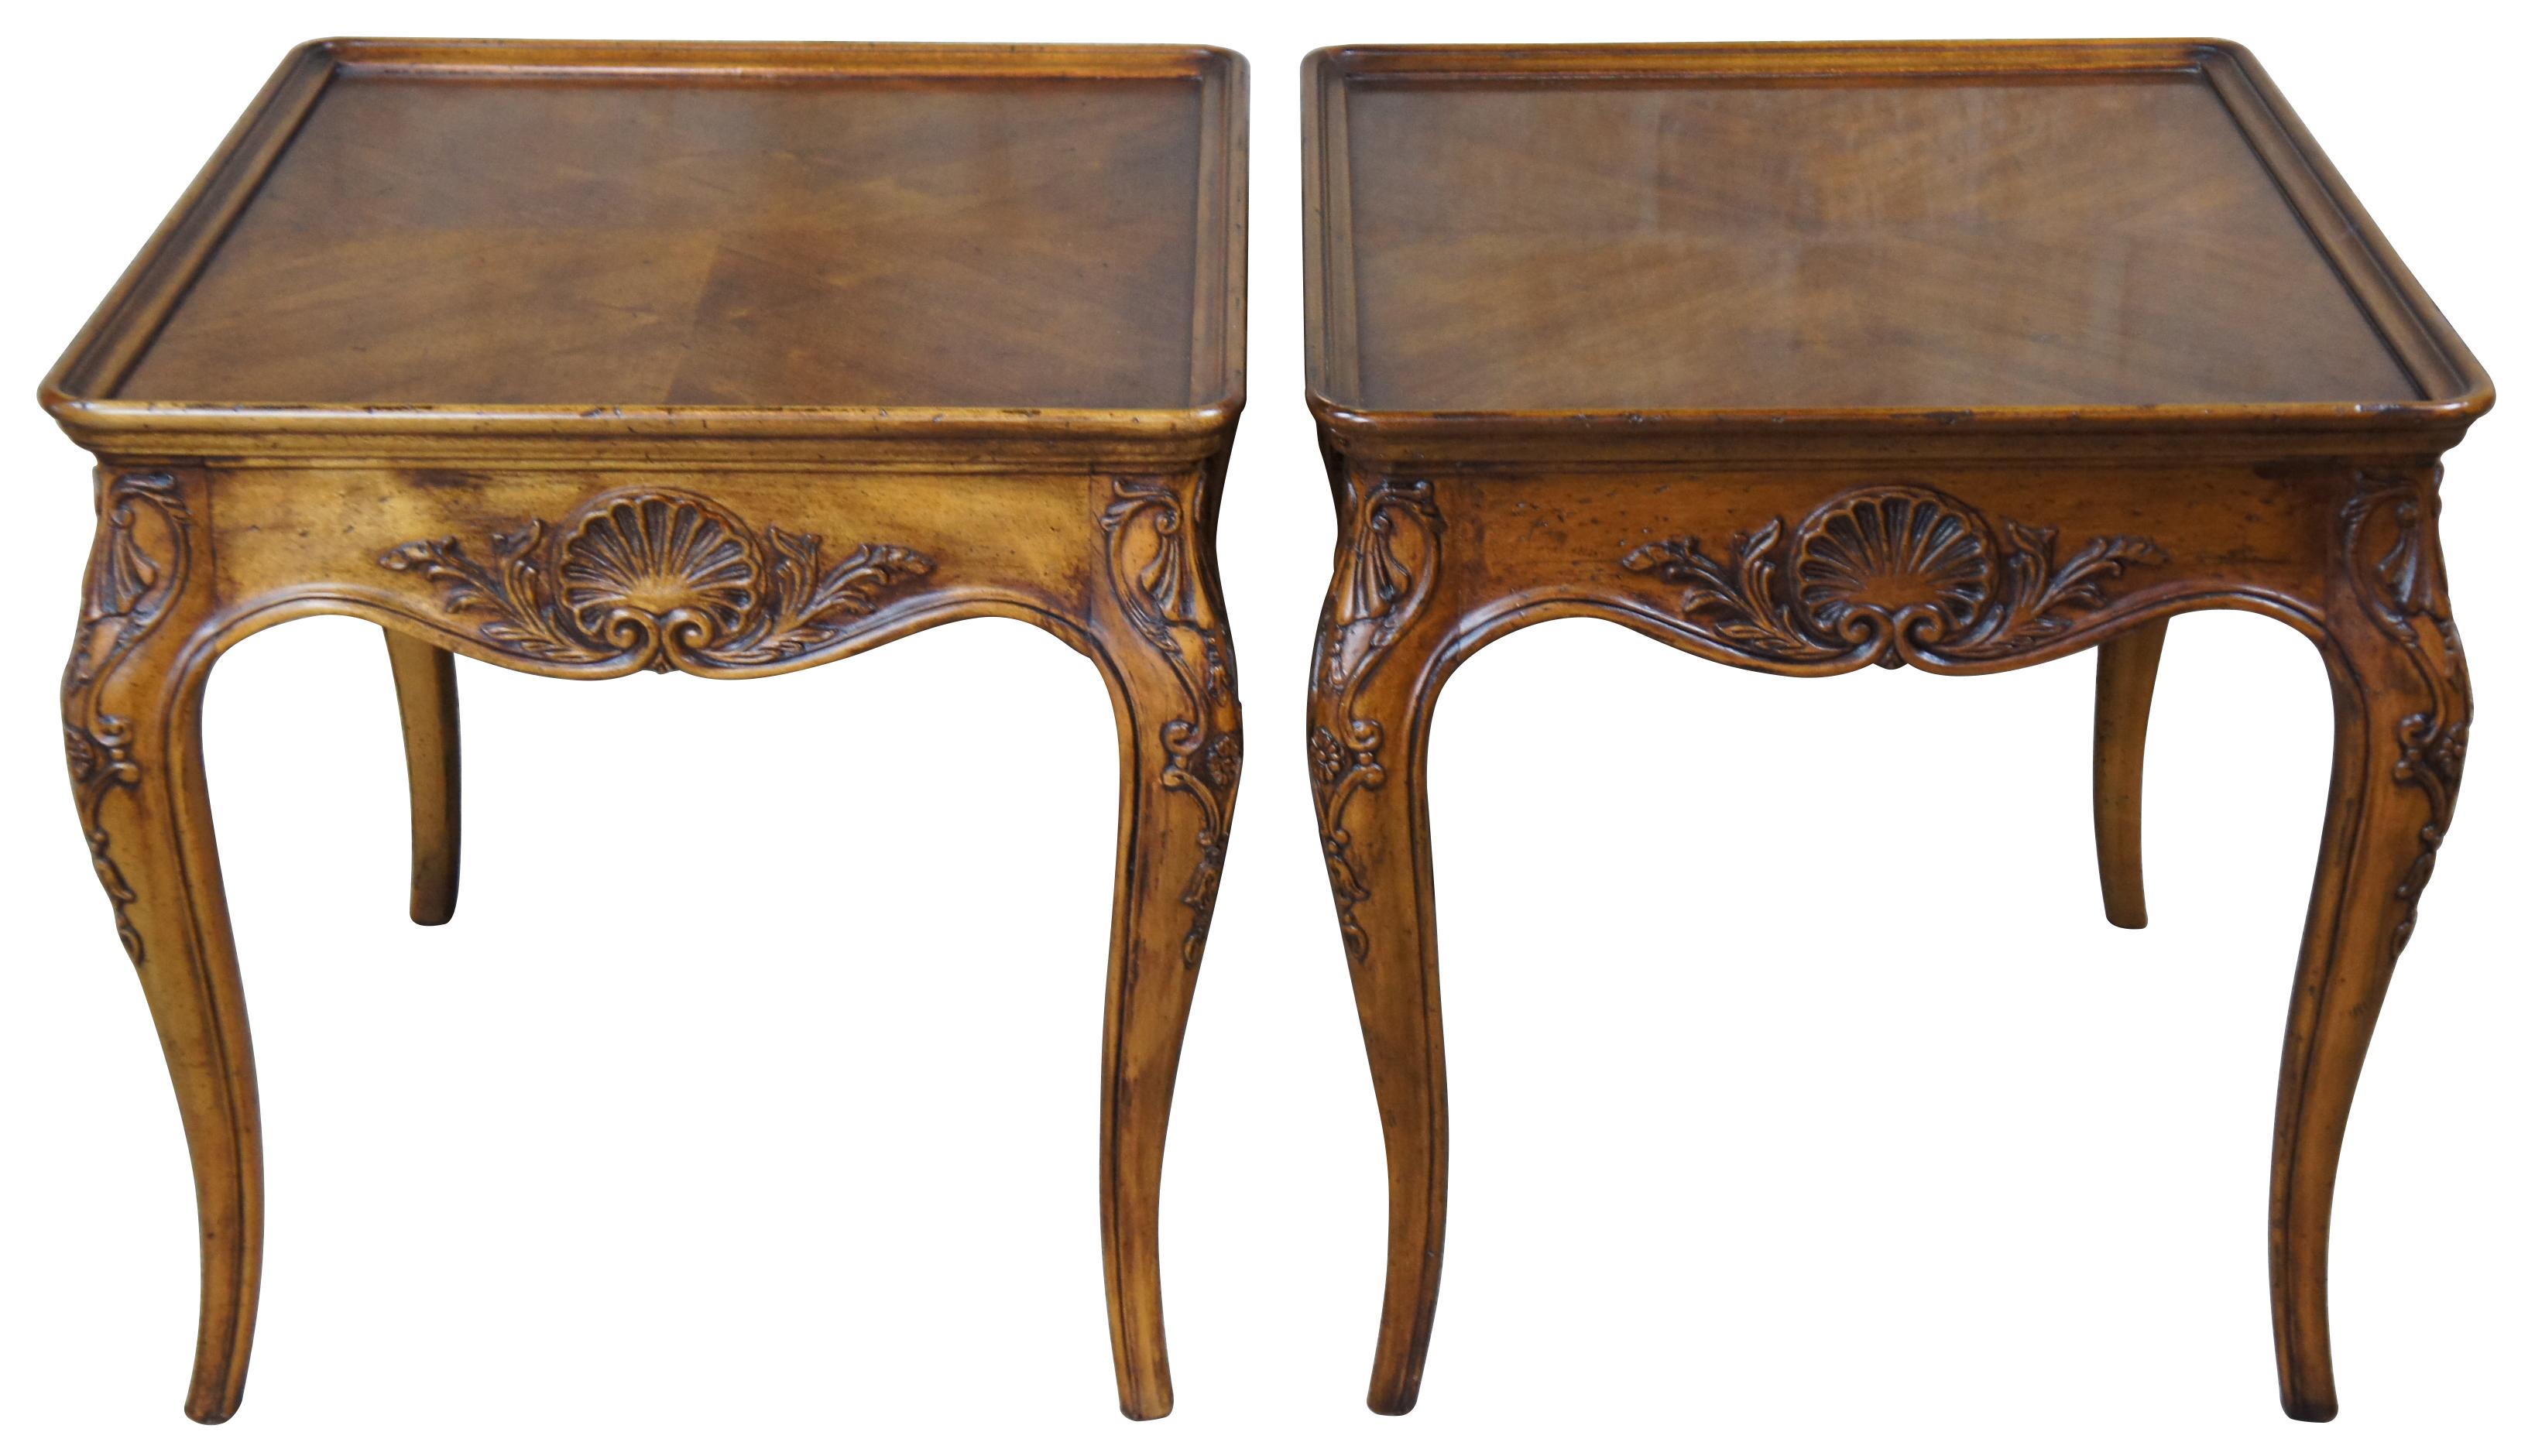 Pair of Henredon French Country side tables, circa 1987. Made from Walnut with an inset bookmatched walnut top over a carved and scalloped arpon. The tables are supported by cabriole legs with shell and cartouche carvings. Style No 3201-41.
  